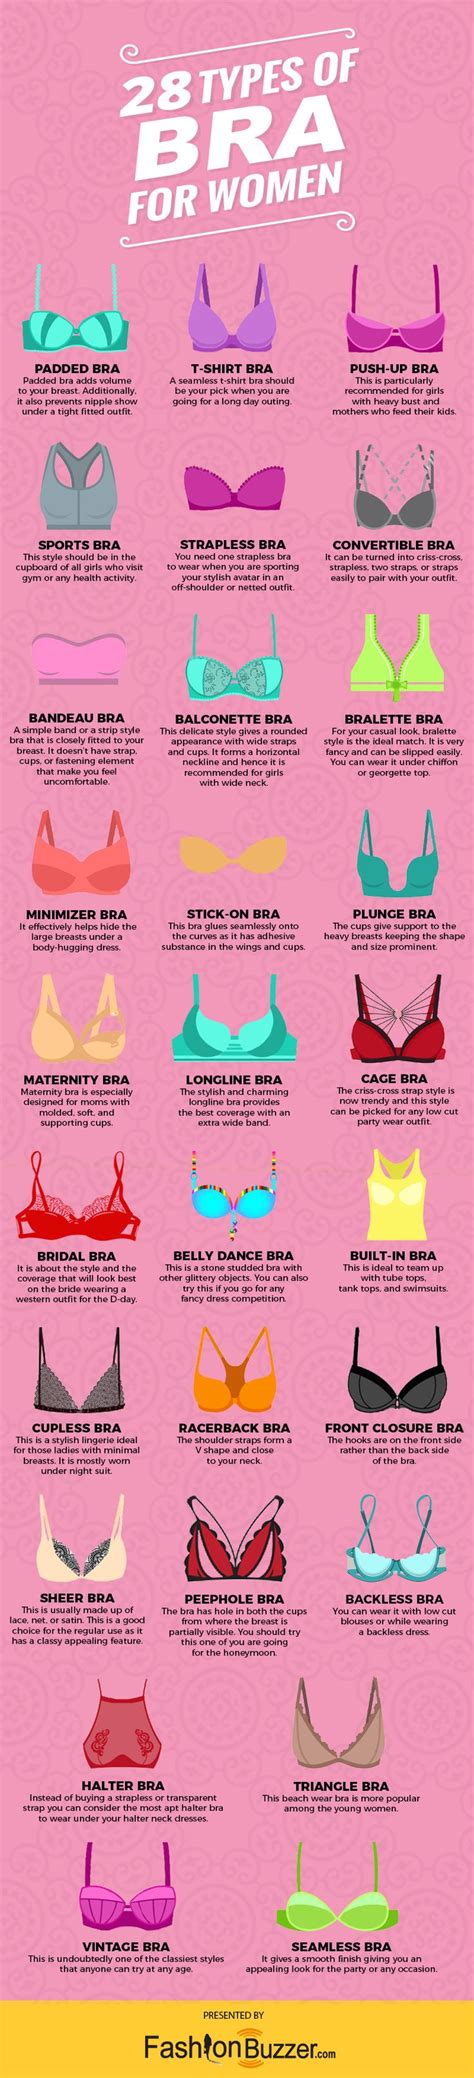 The Bras For Women Are Shown In Different Colors And Sizes With Text Below Them